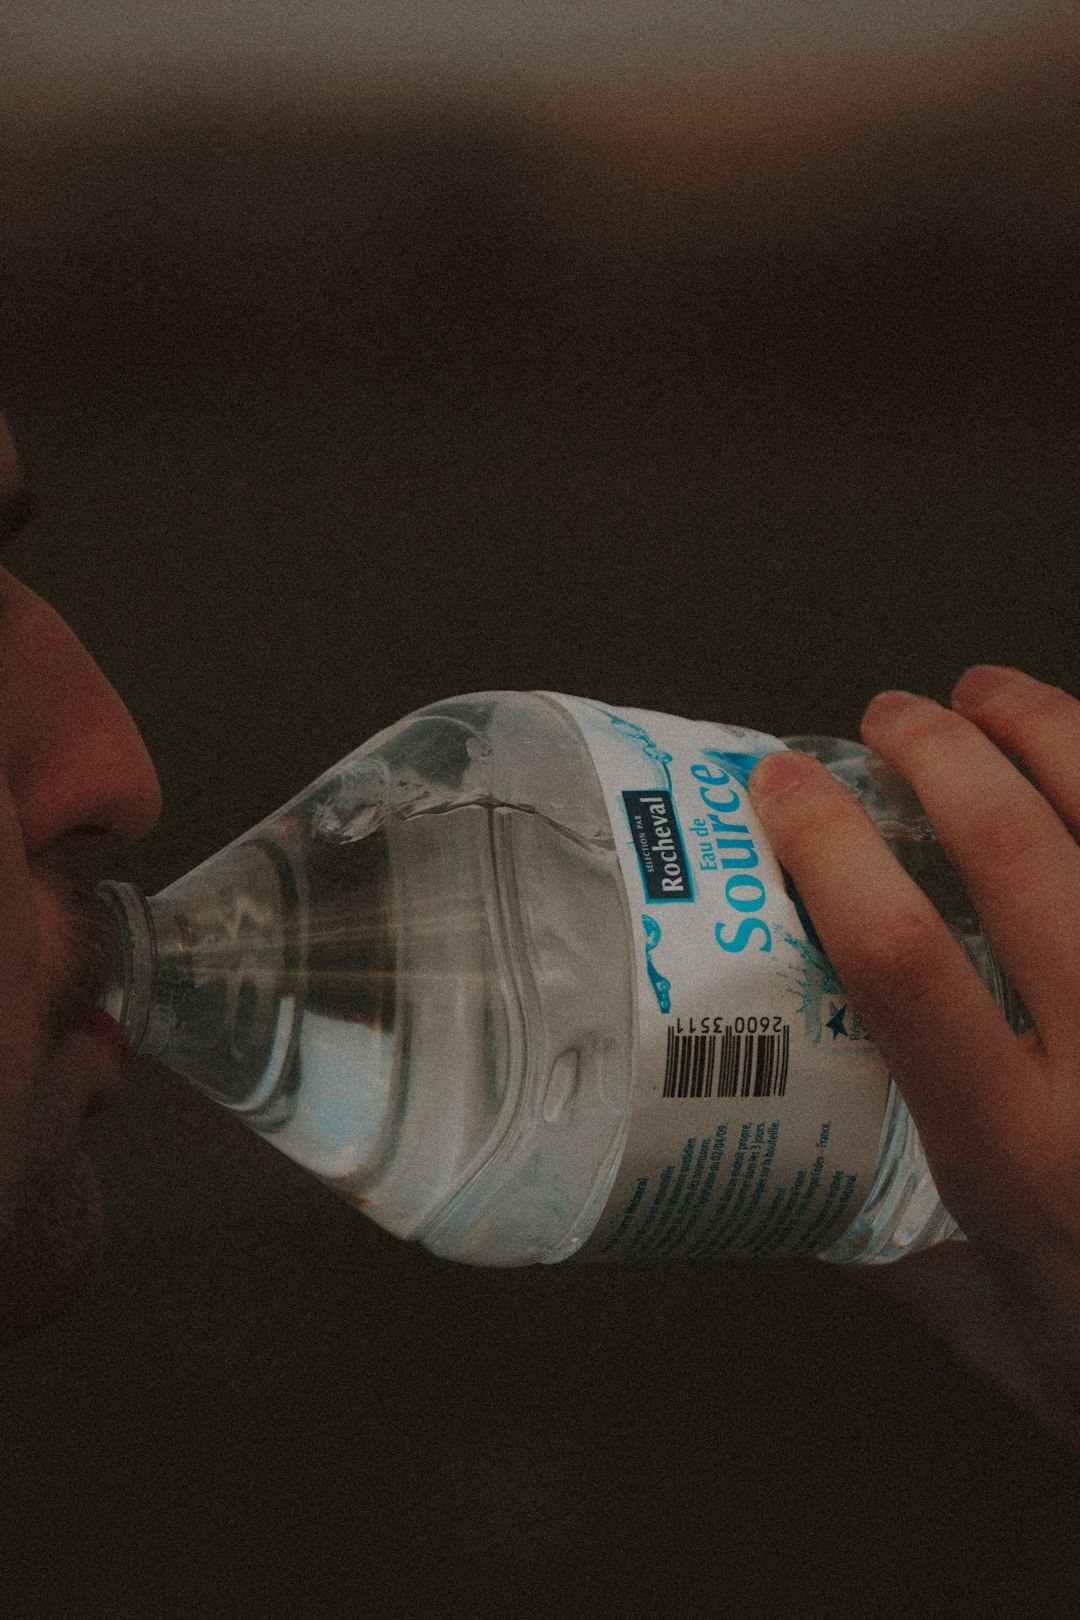 person holding white and blue labeled bottled water